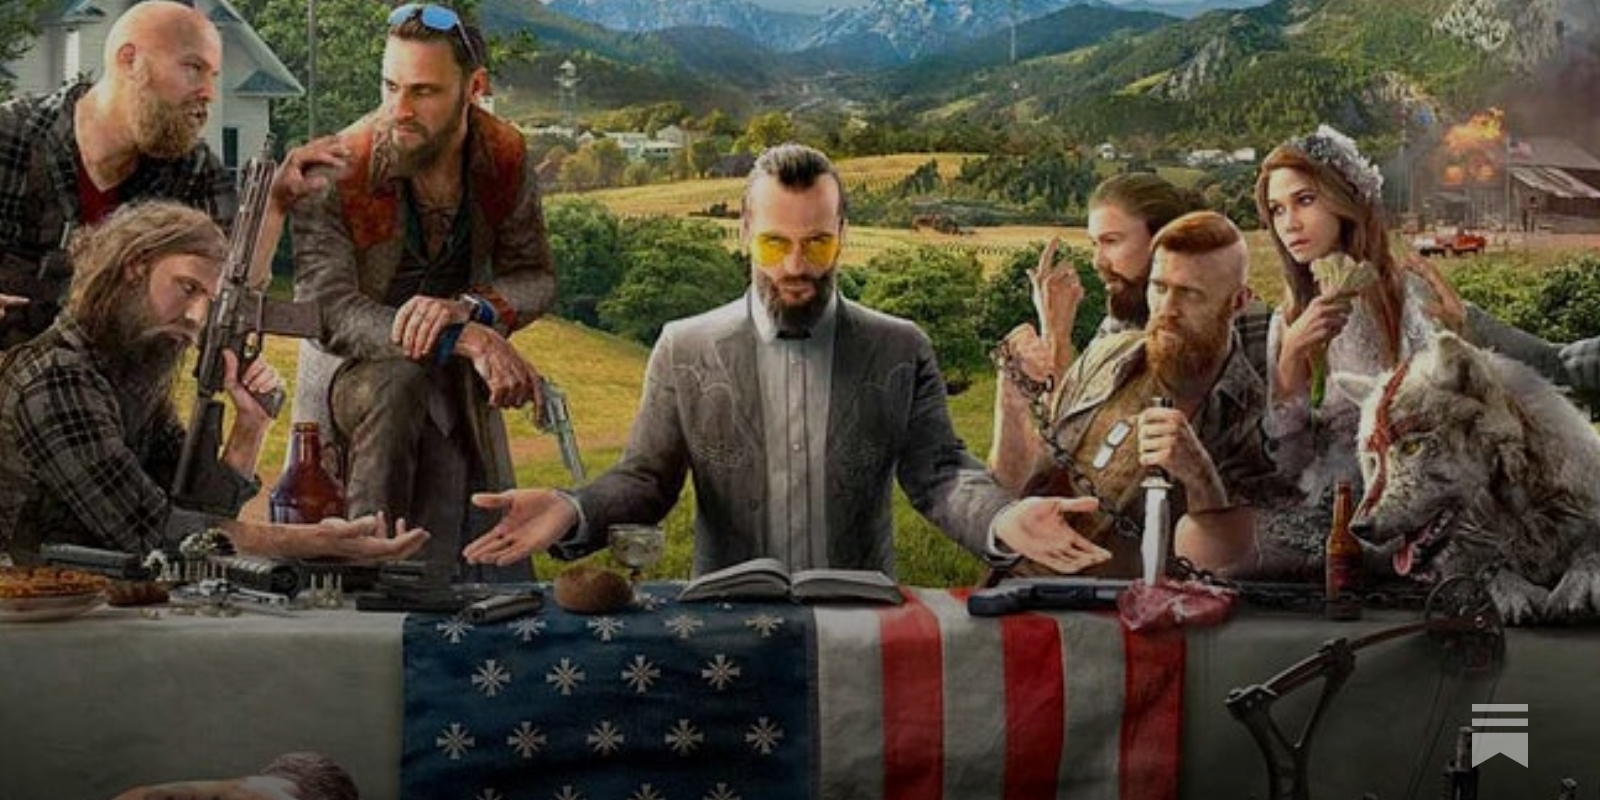 Far Cry 5 gets PS5, Xbox Series X/S update to celebrate 5th anniversary